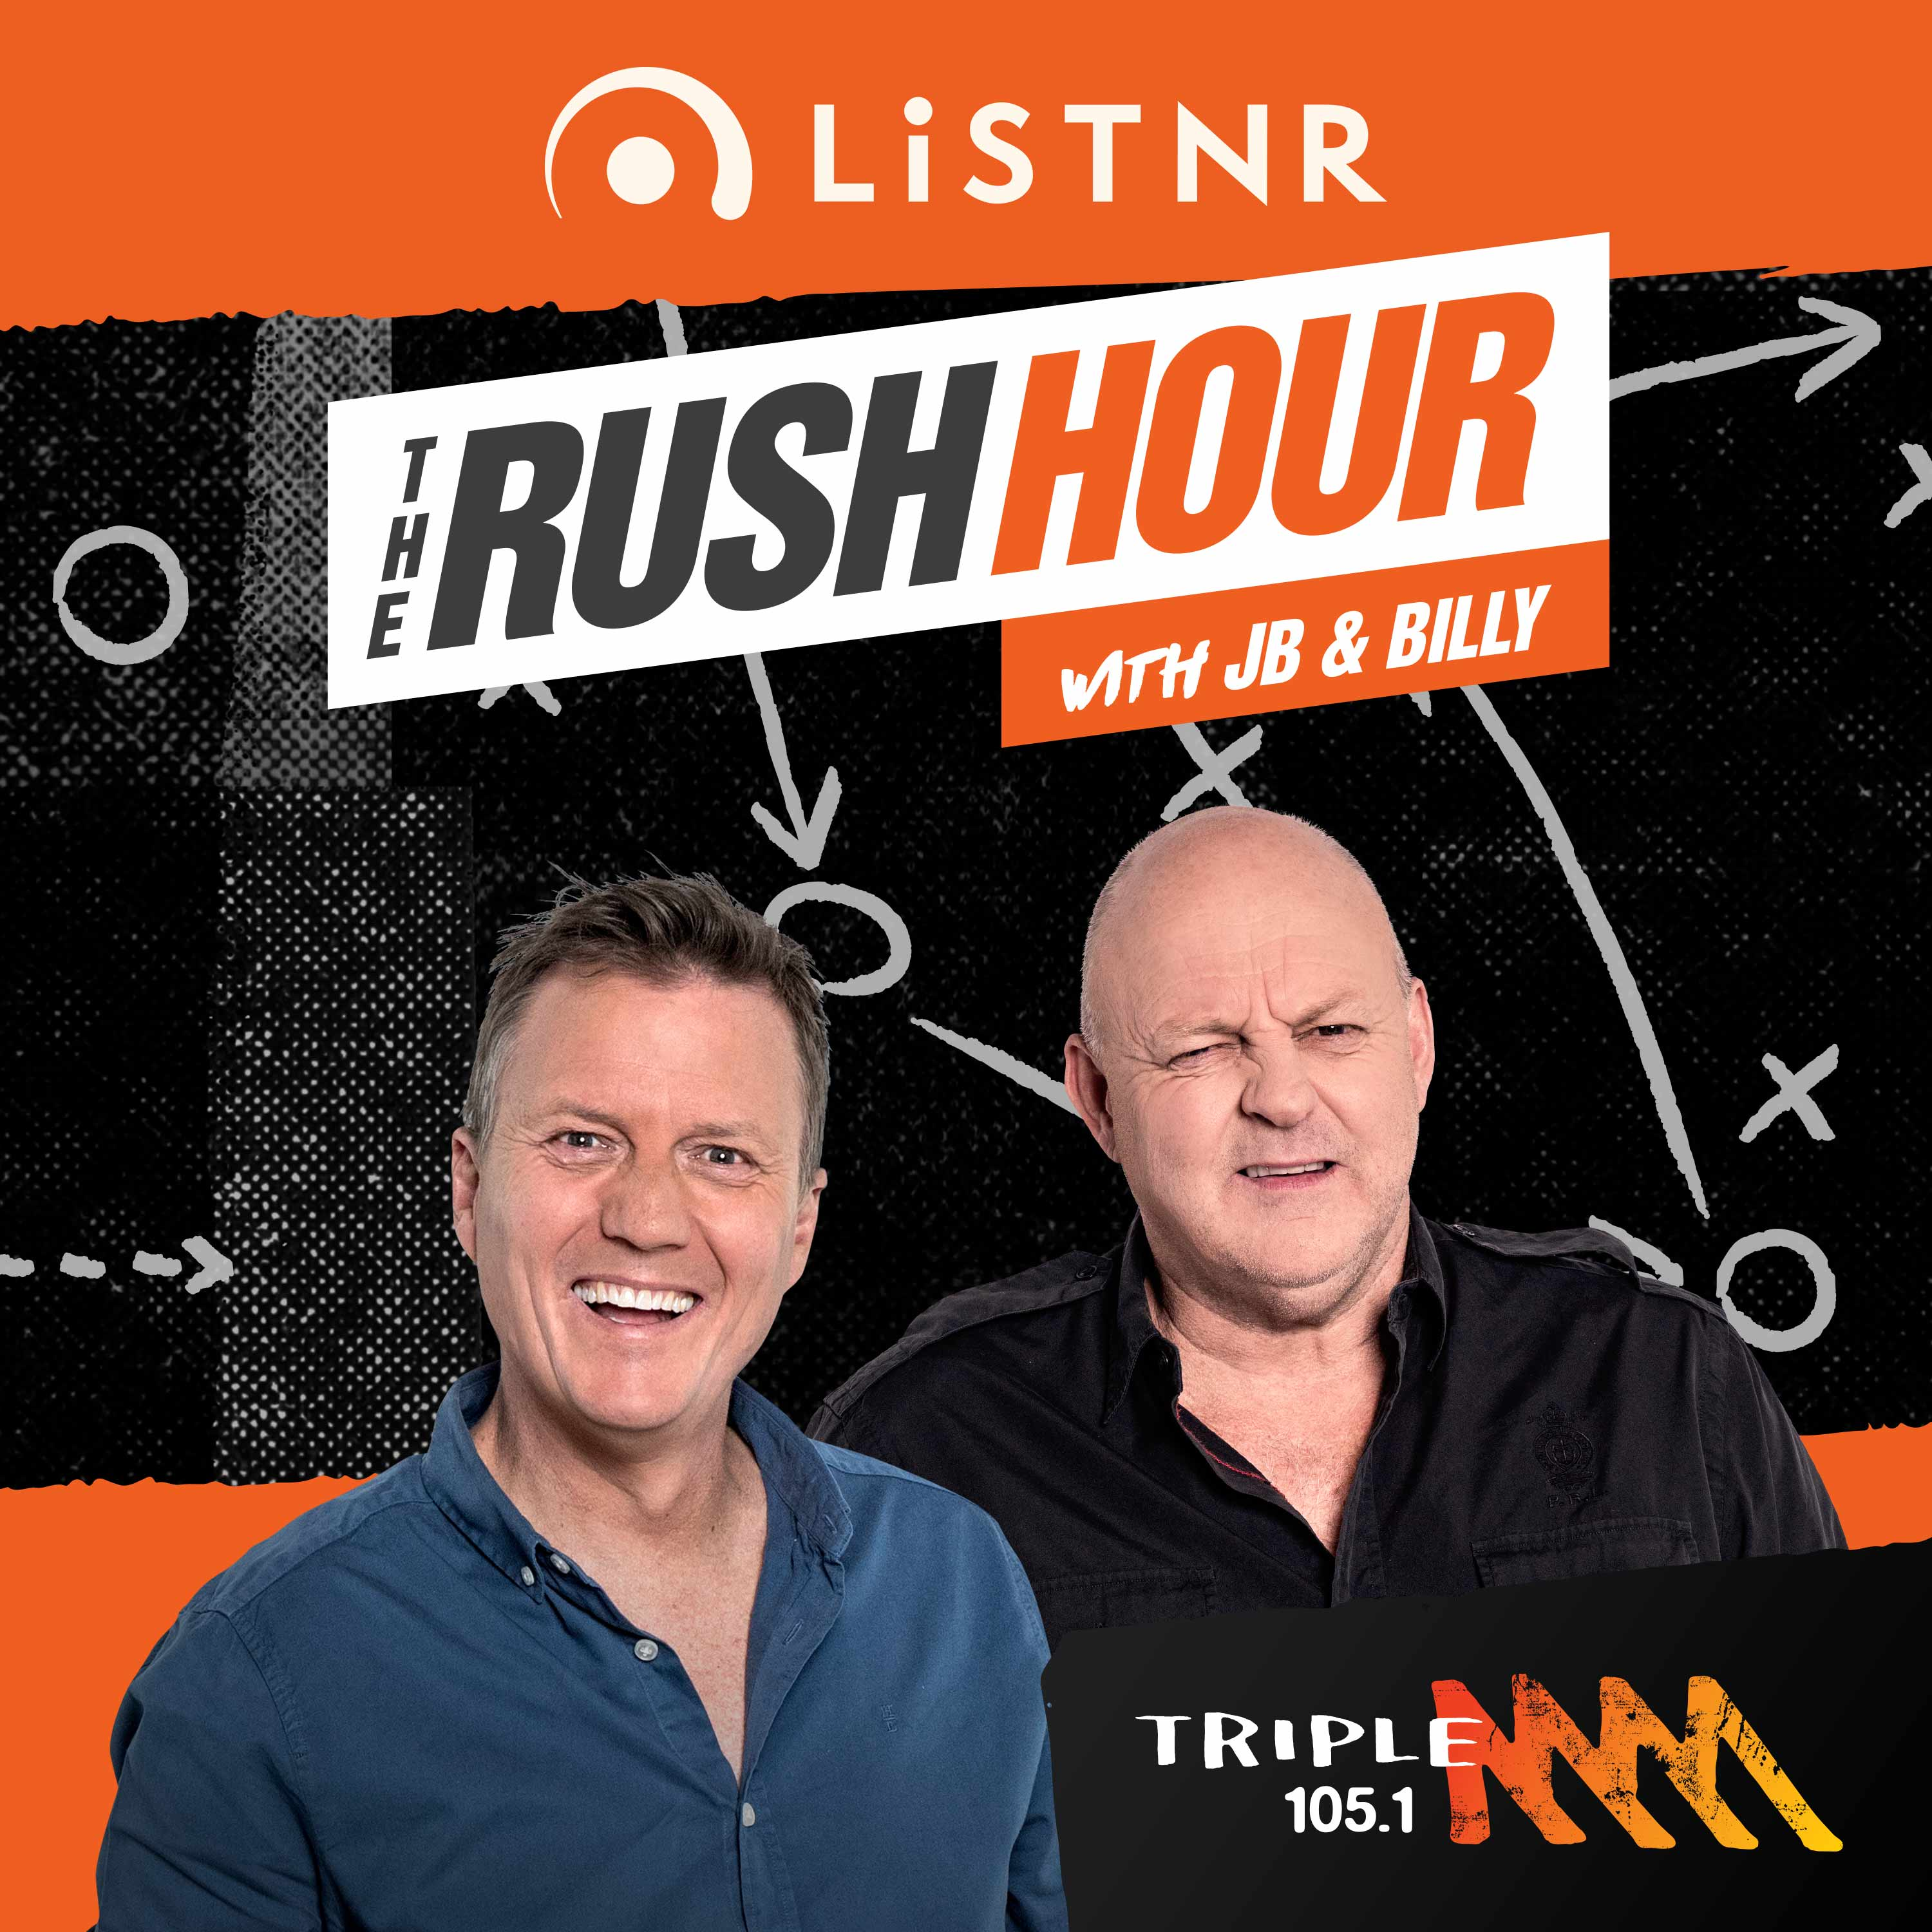 Do Collingwood's Irish AFLW players know Eddie Mcguire?, Trump and Tendulkar, I'm not finished you dick! - The Rush Hour Catch Up podcast - Tuesday 25th February 2020